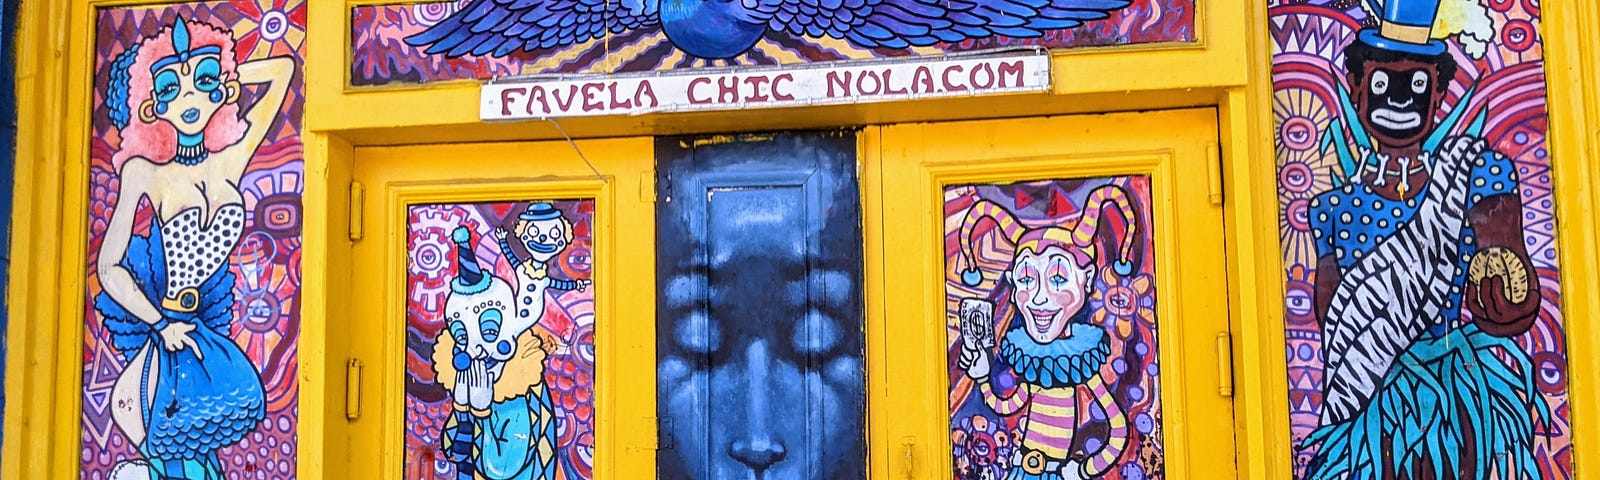 This shows some colorful artwork on doors in New Orleans.